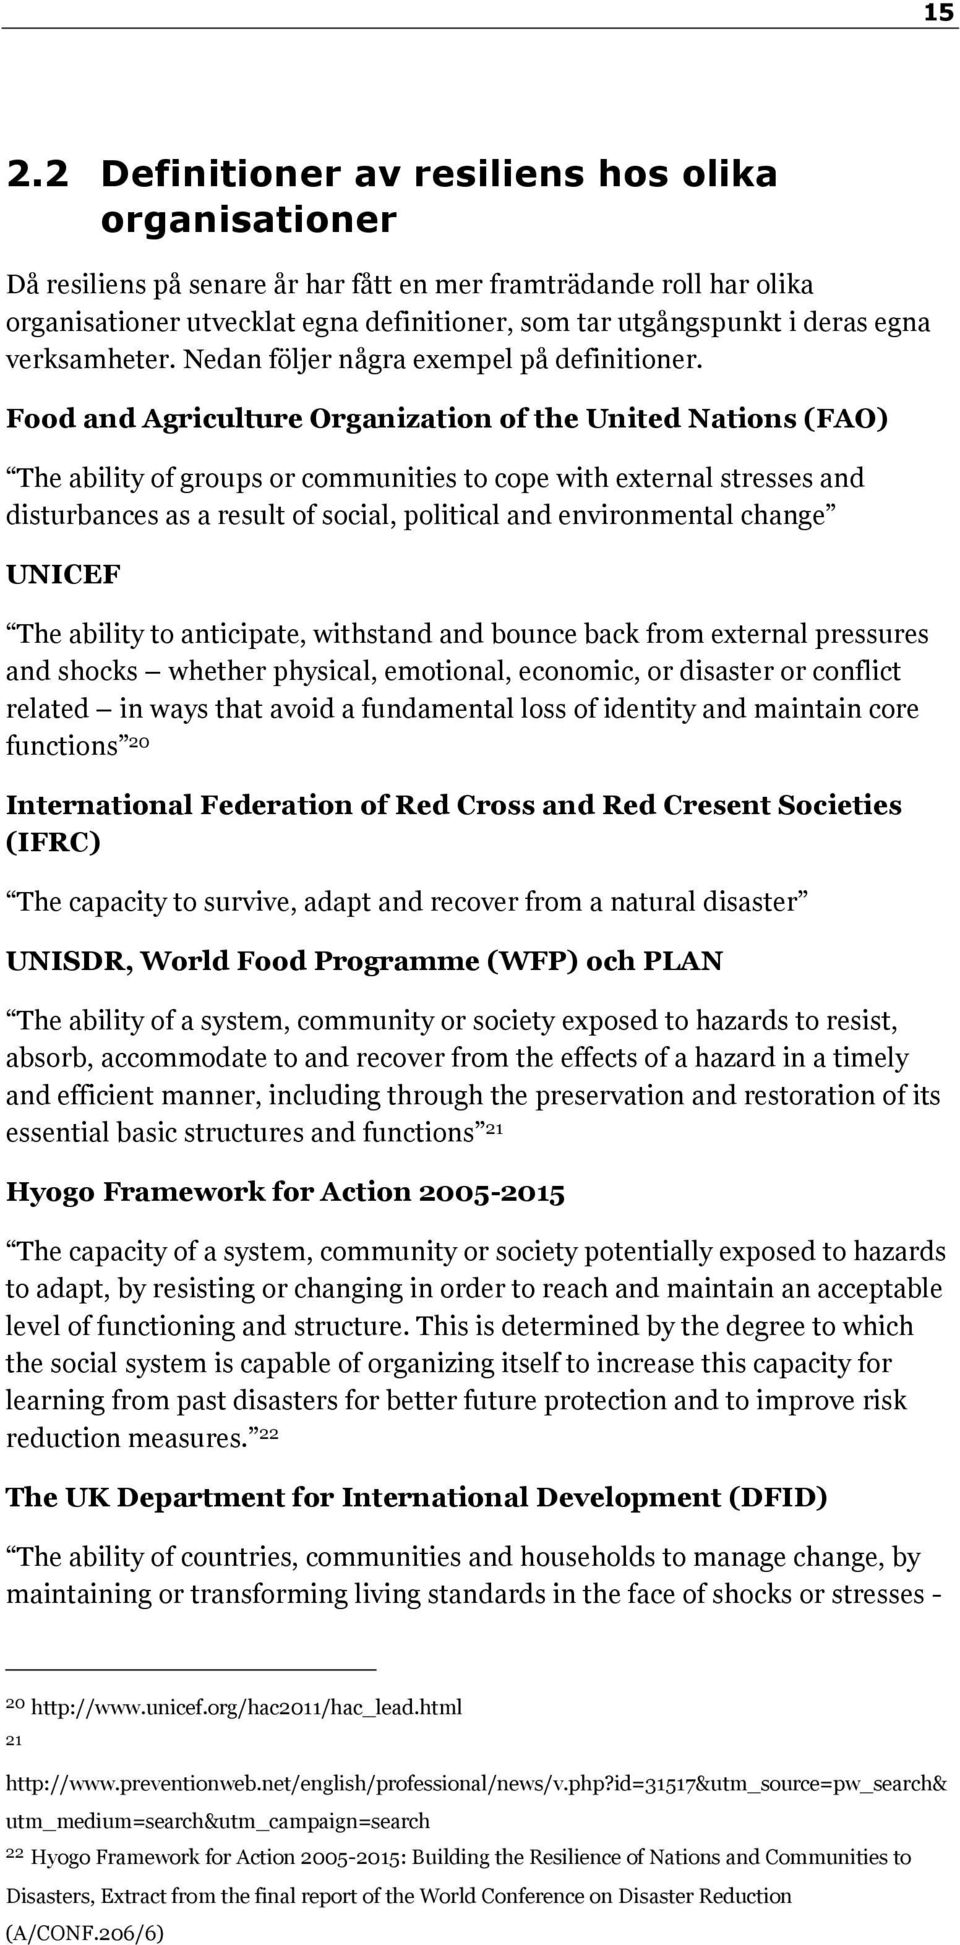 Food and Agriculture Organization of the United Nations (FAO) The ability of groups or communities to cope with external stresses and disturbances as a result of social, political and environmental